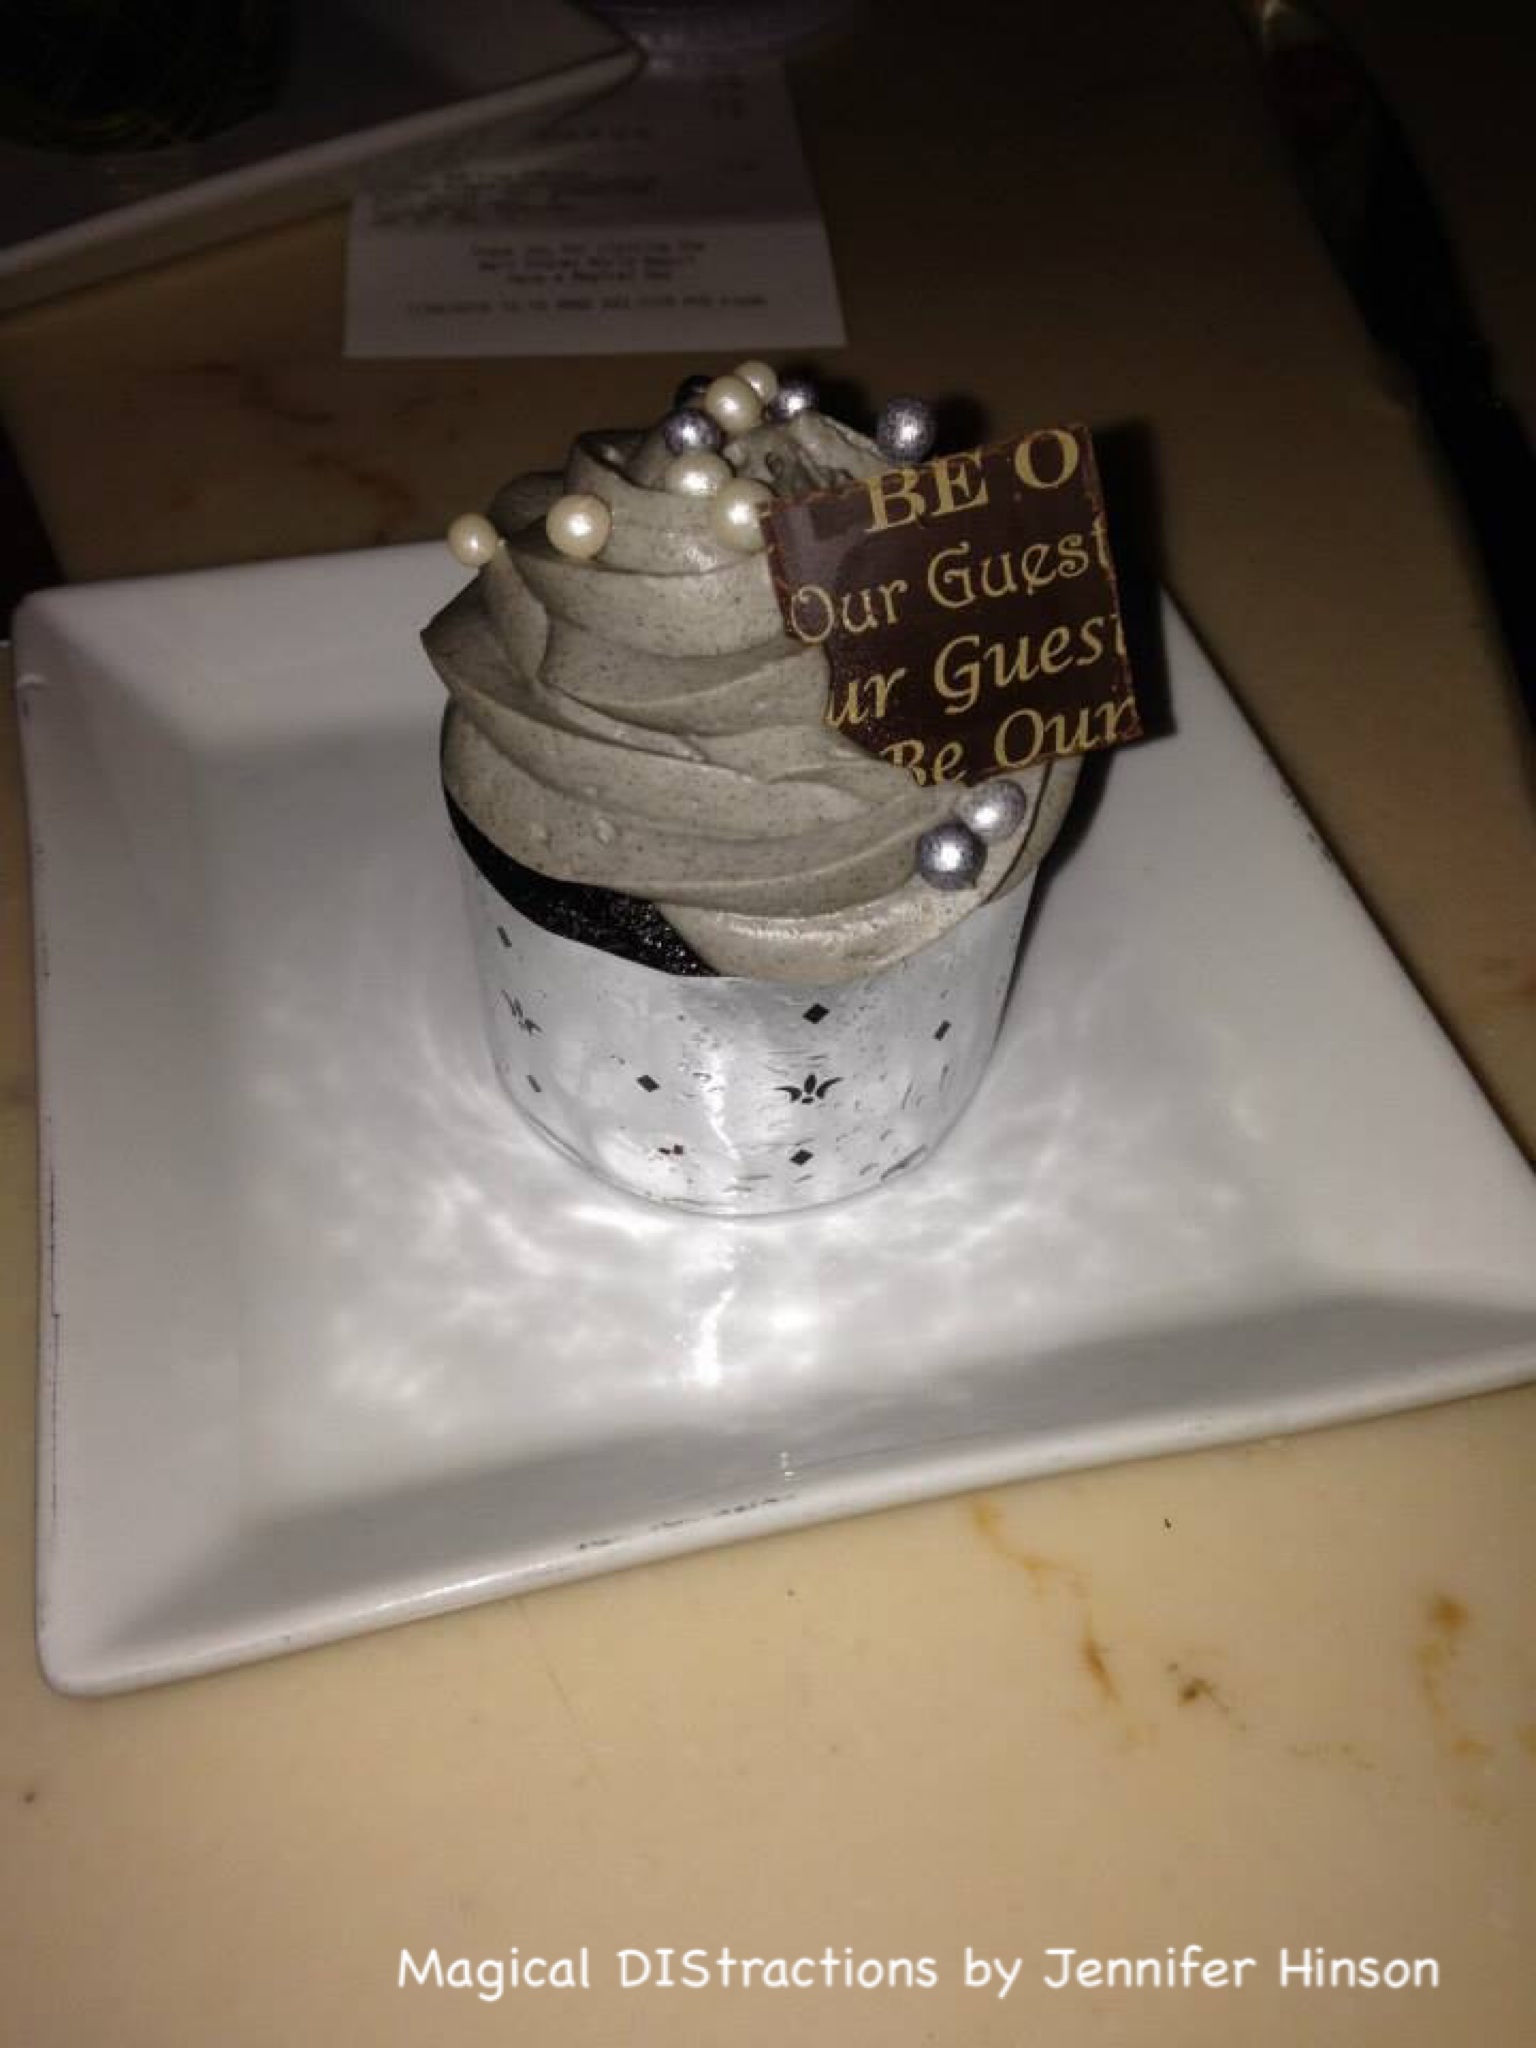 The Master's Cupcake from Be Our Guest